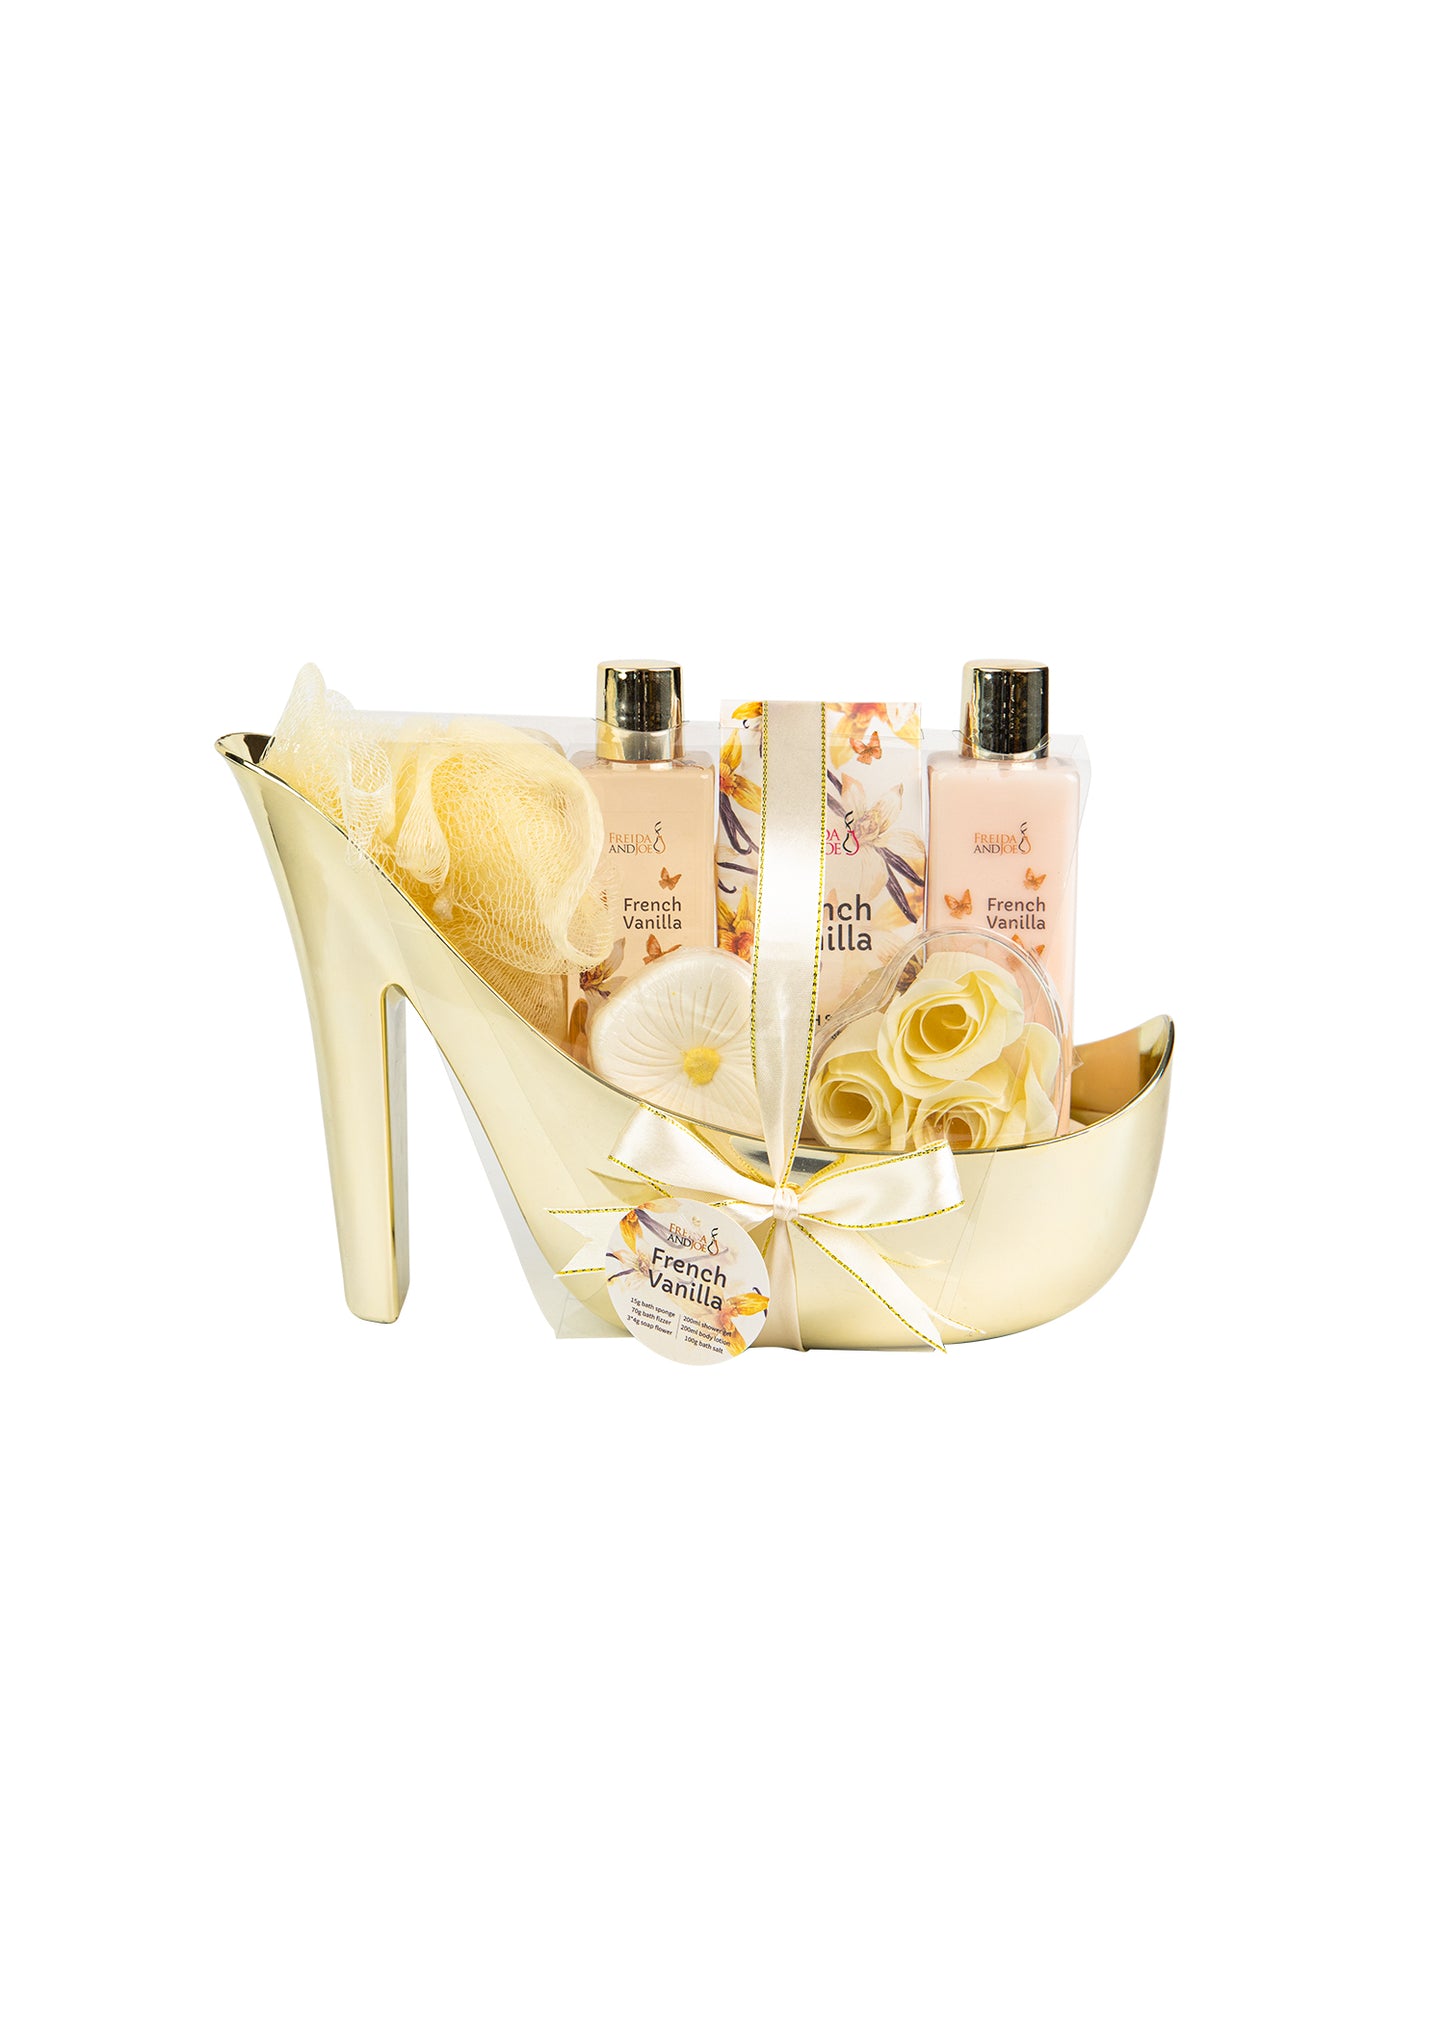 Elegant French Vanilla Bath Set Gold High Heel Shoe Luxurious Spa Gift Perfect for Gifting, Pampering, & Home Decor